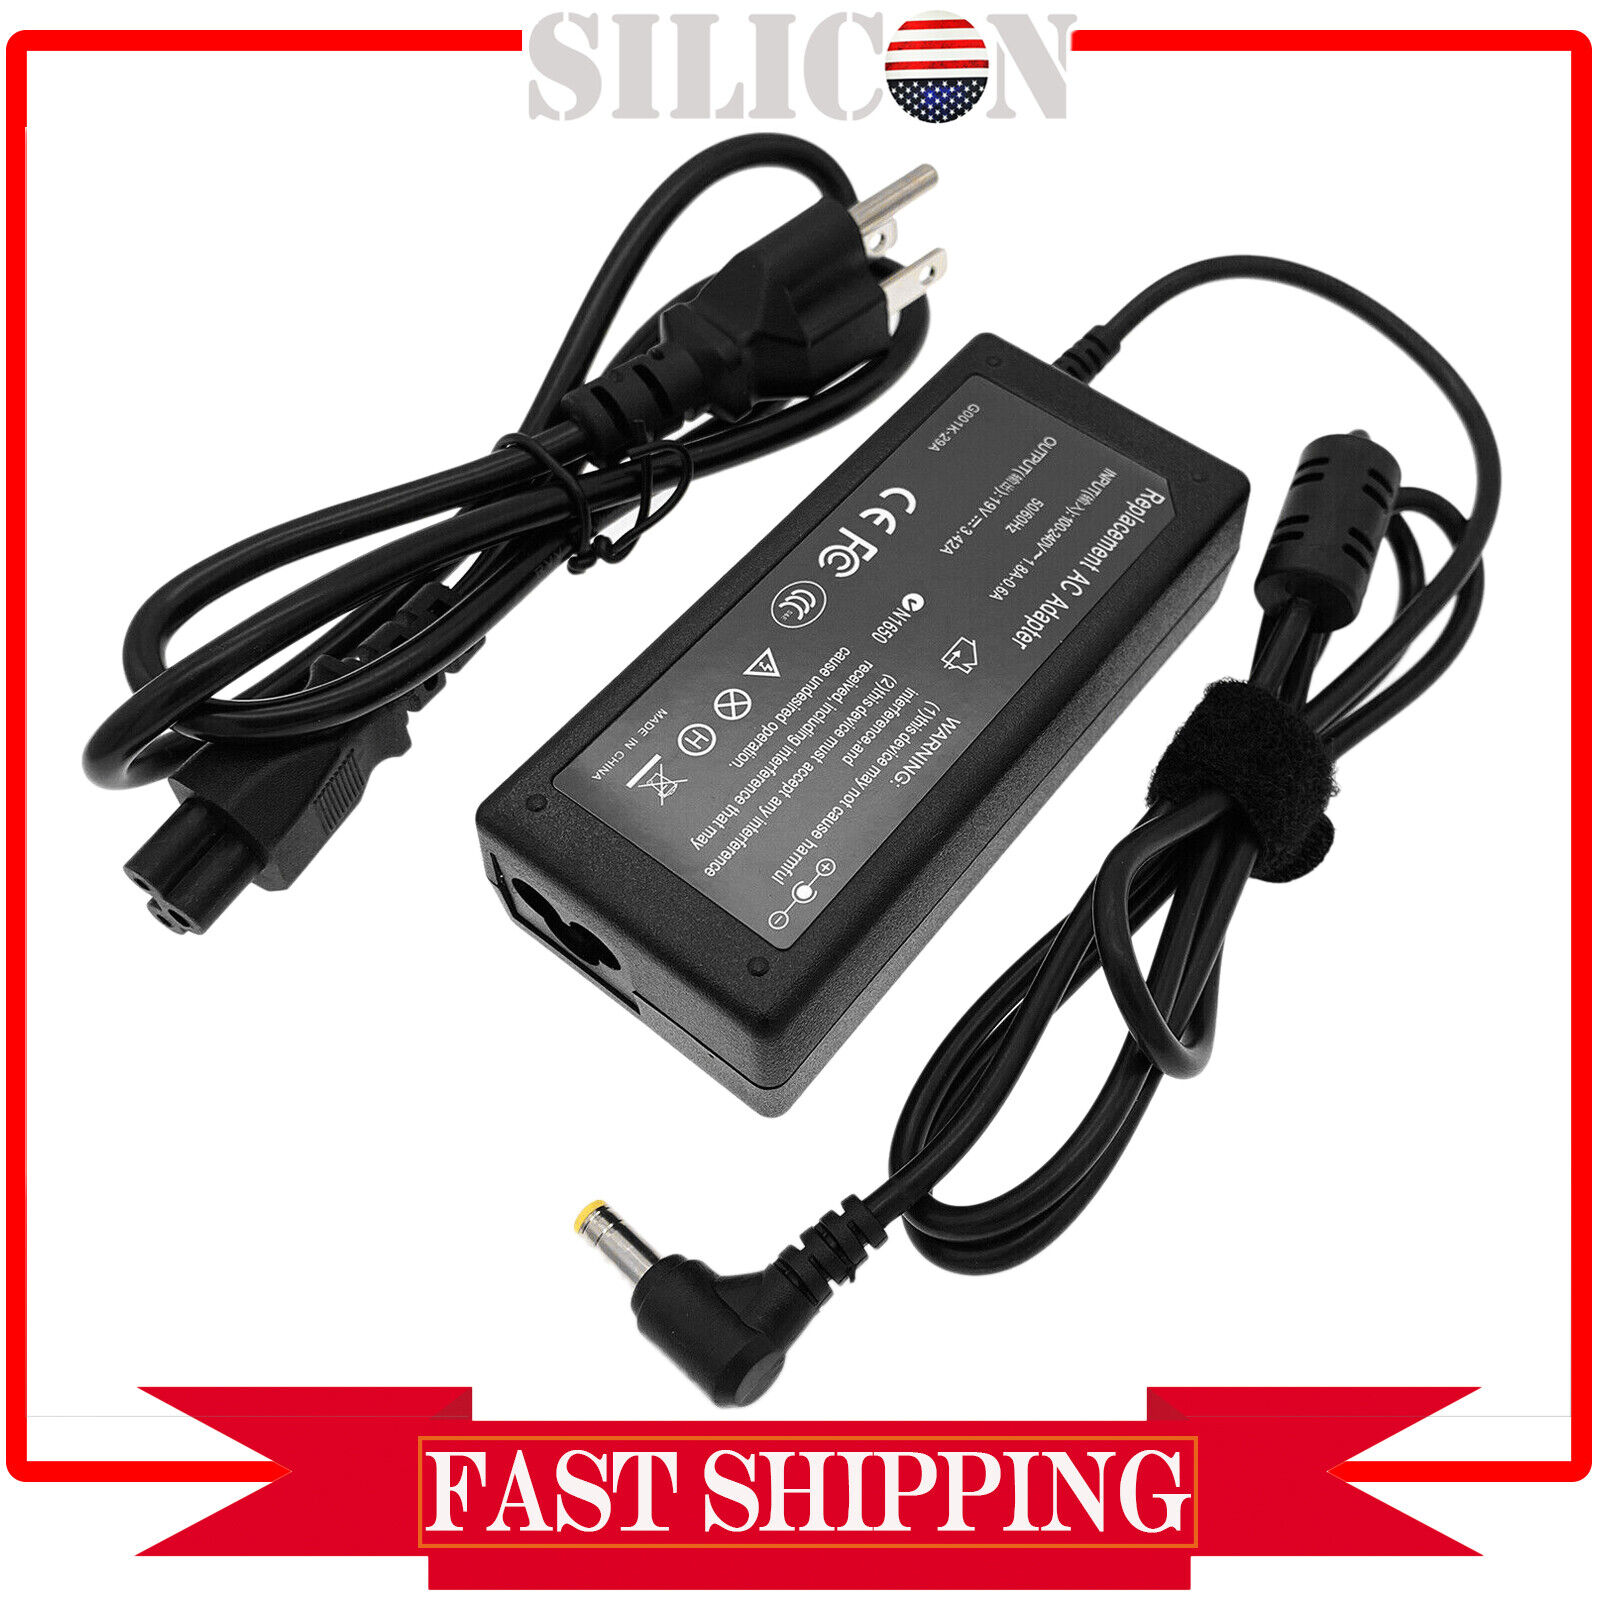 AC Adapter Charger Power Supply Cord For Toshiba Satellite PA3917U-1ACA laptop